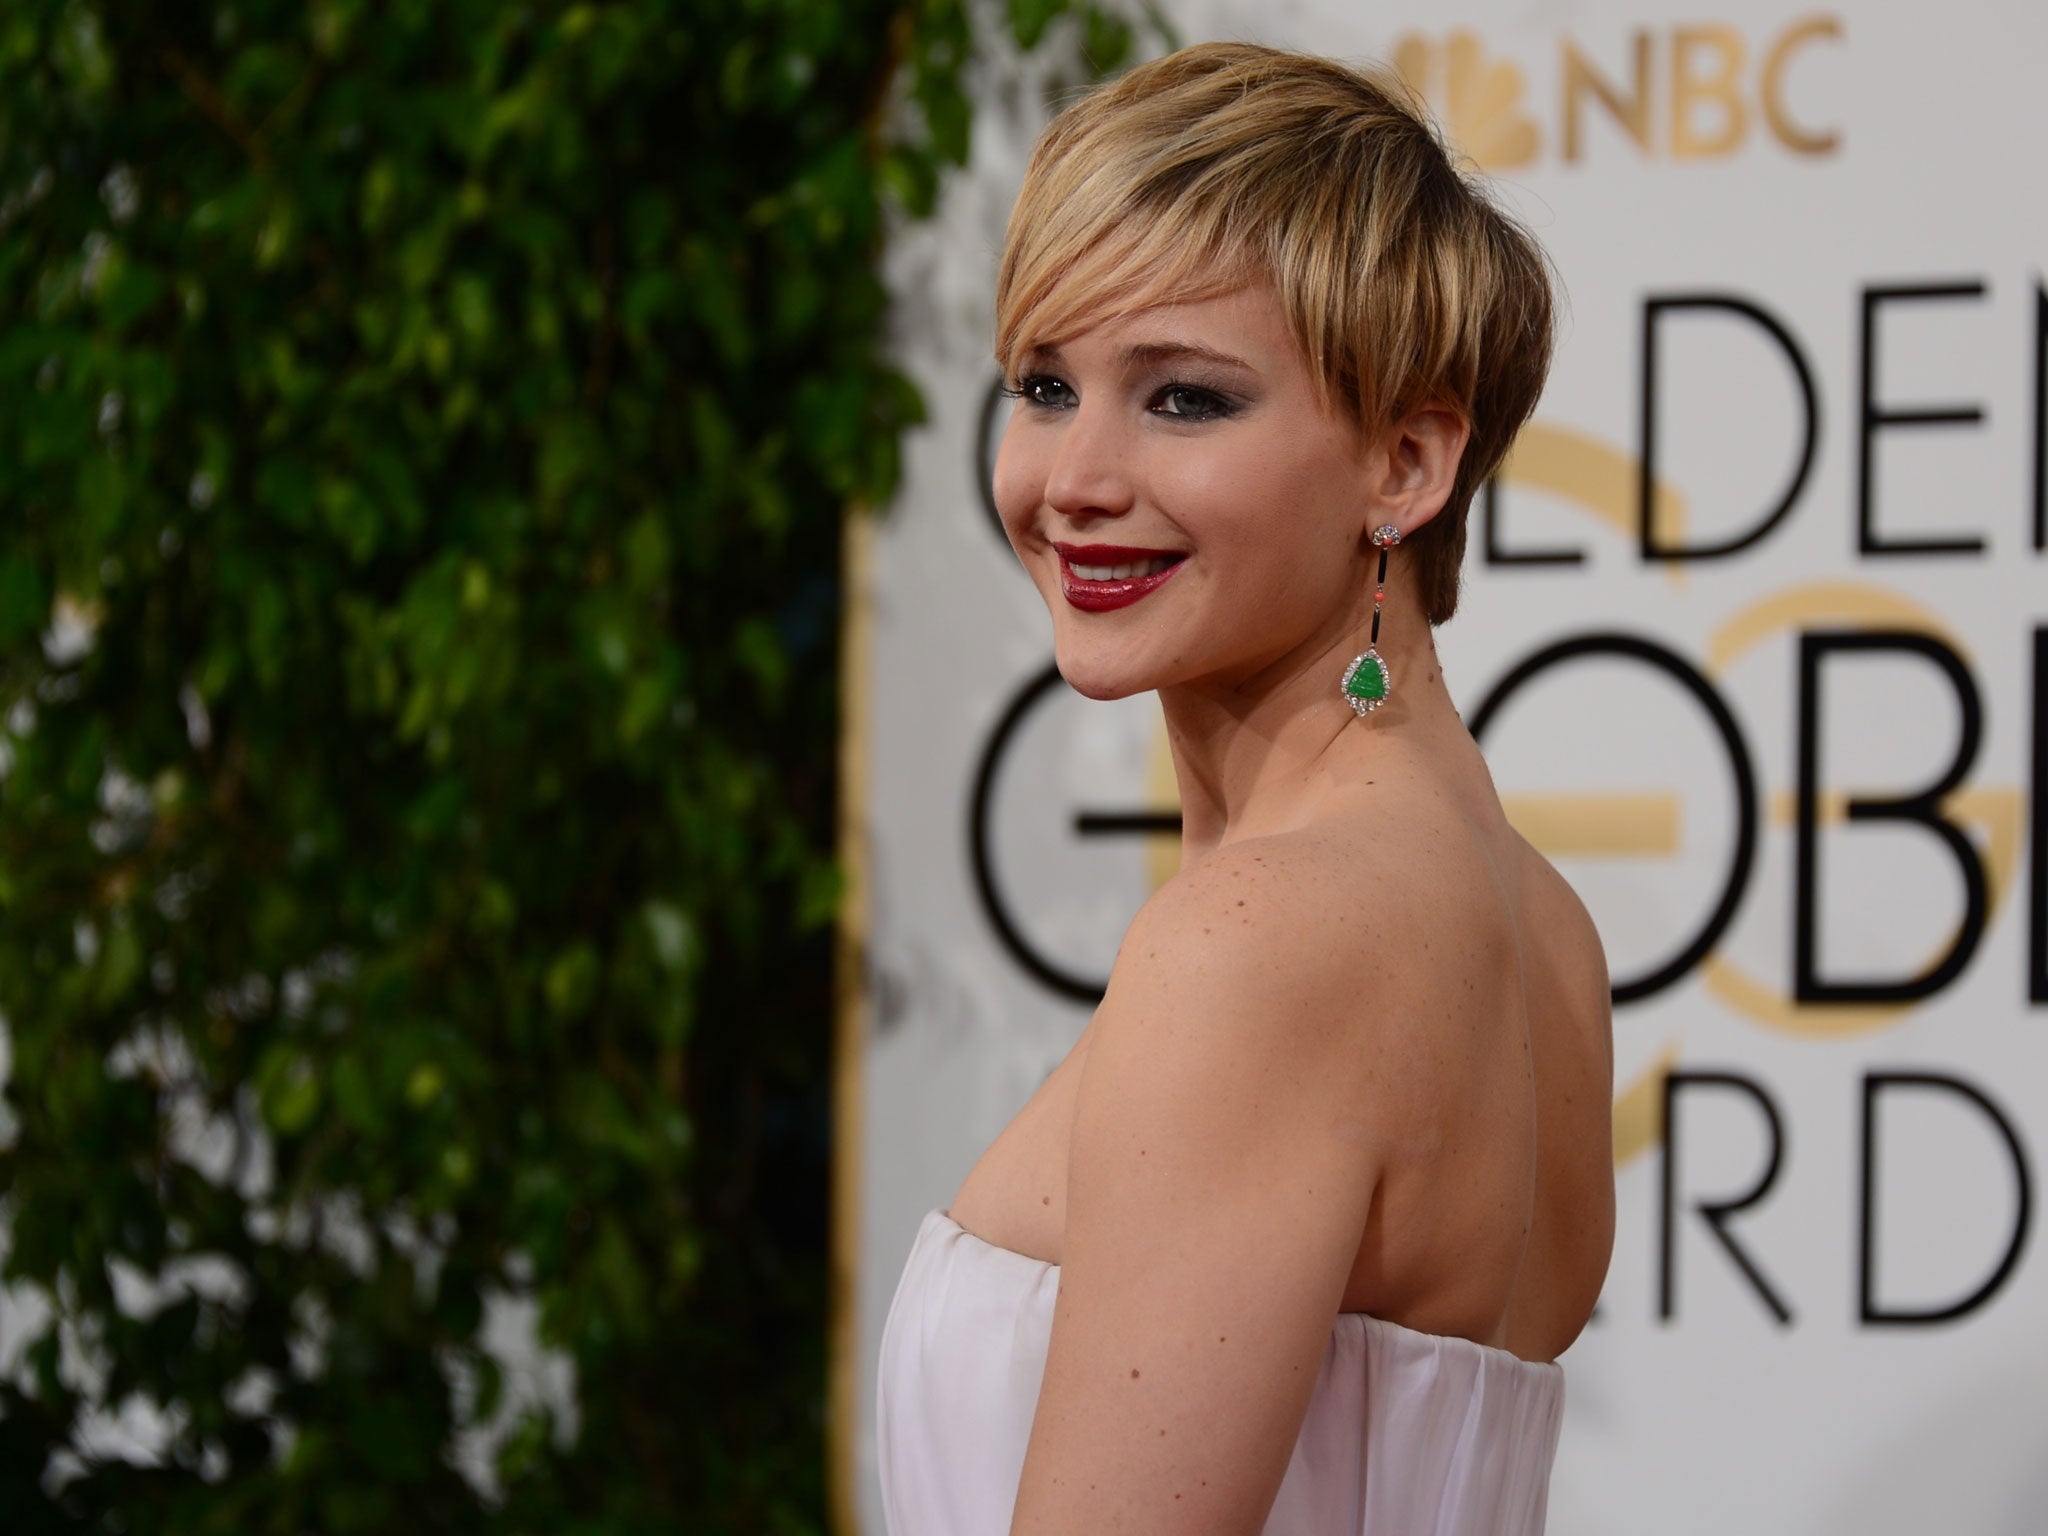 Jennifer Lawrence wore Dior and pulled it off perfectly